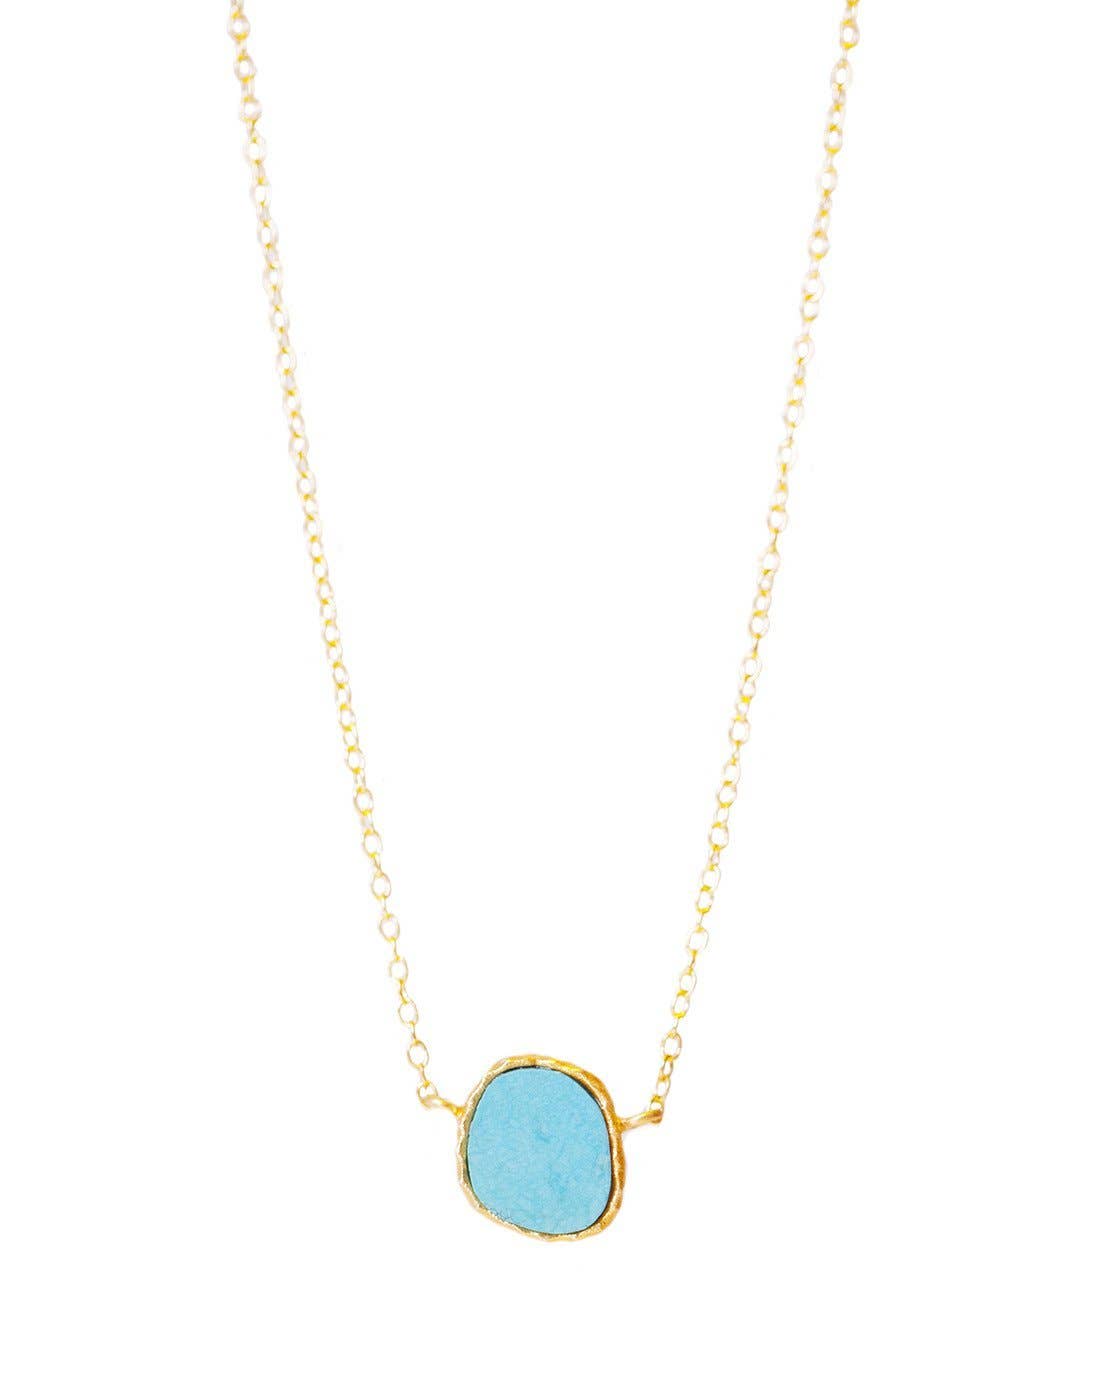 Delicate Necklace - Turquoise